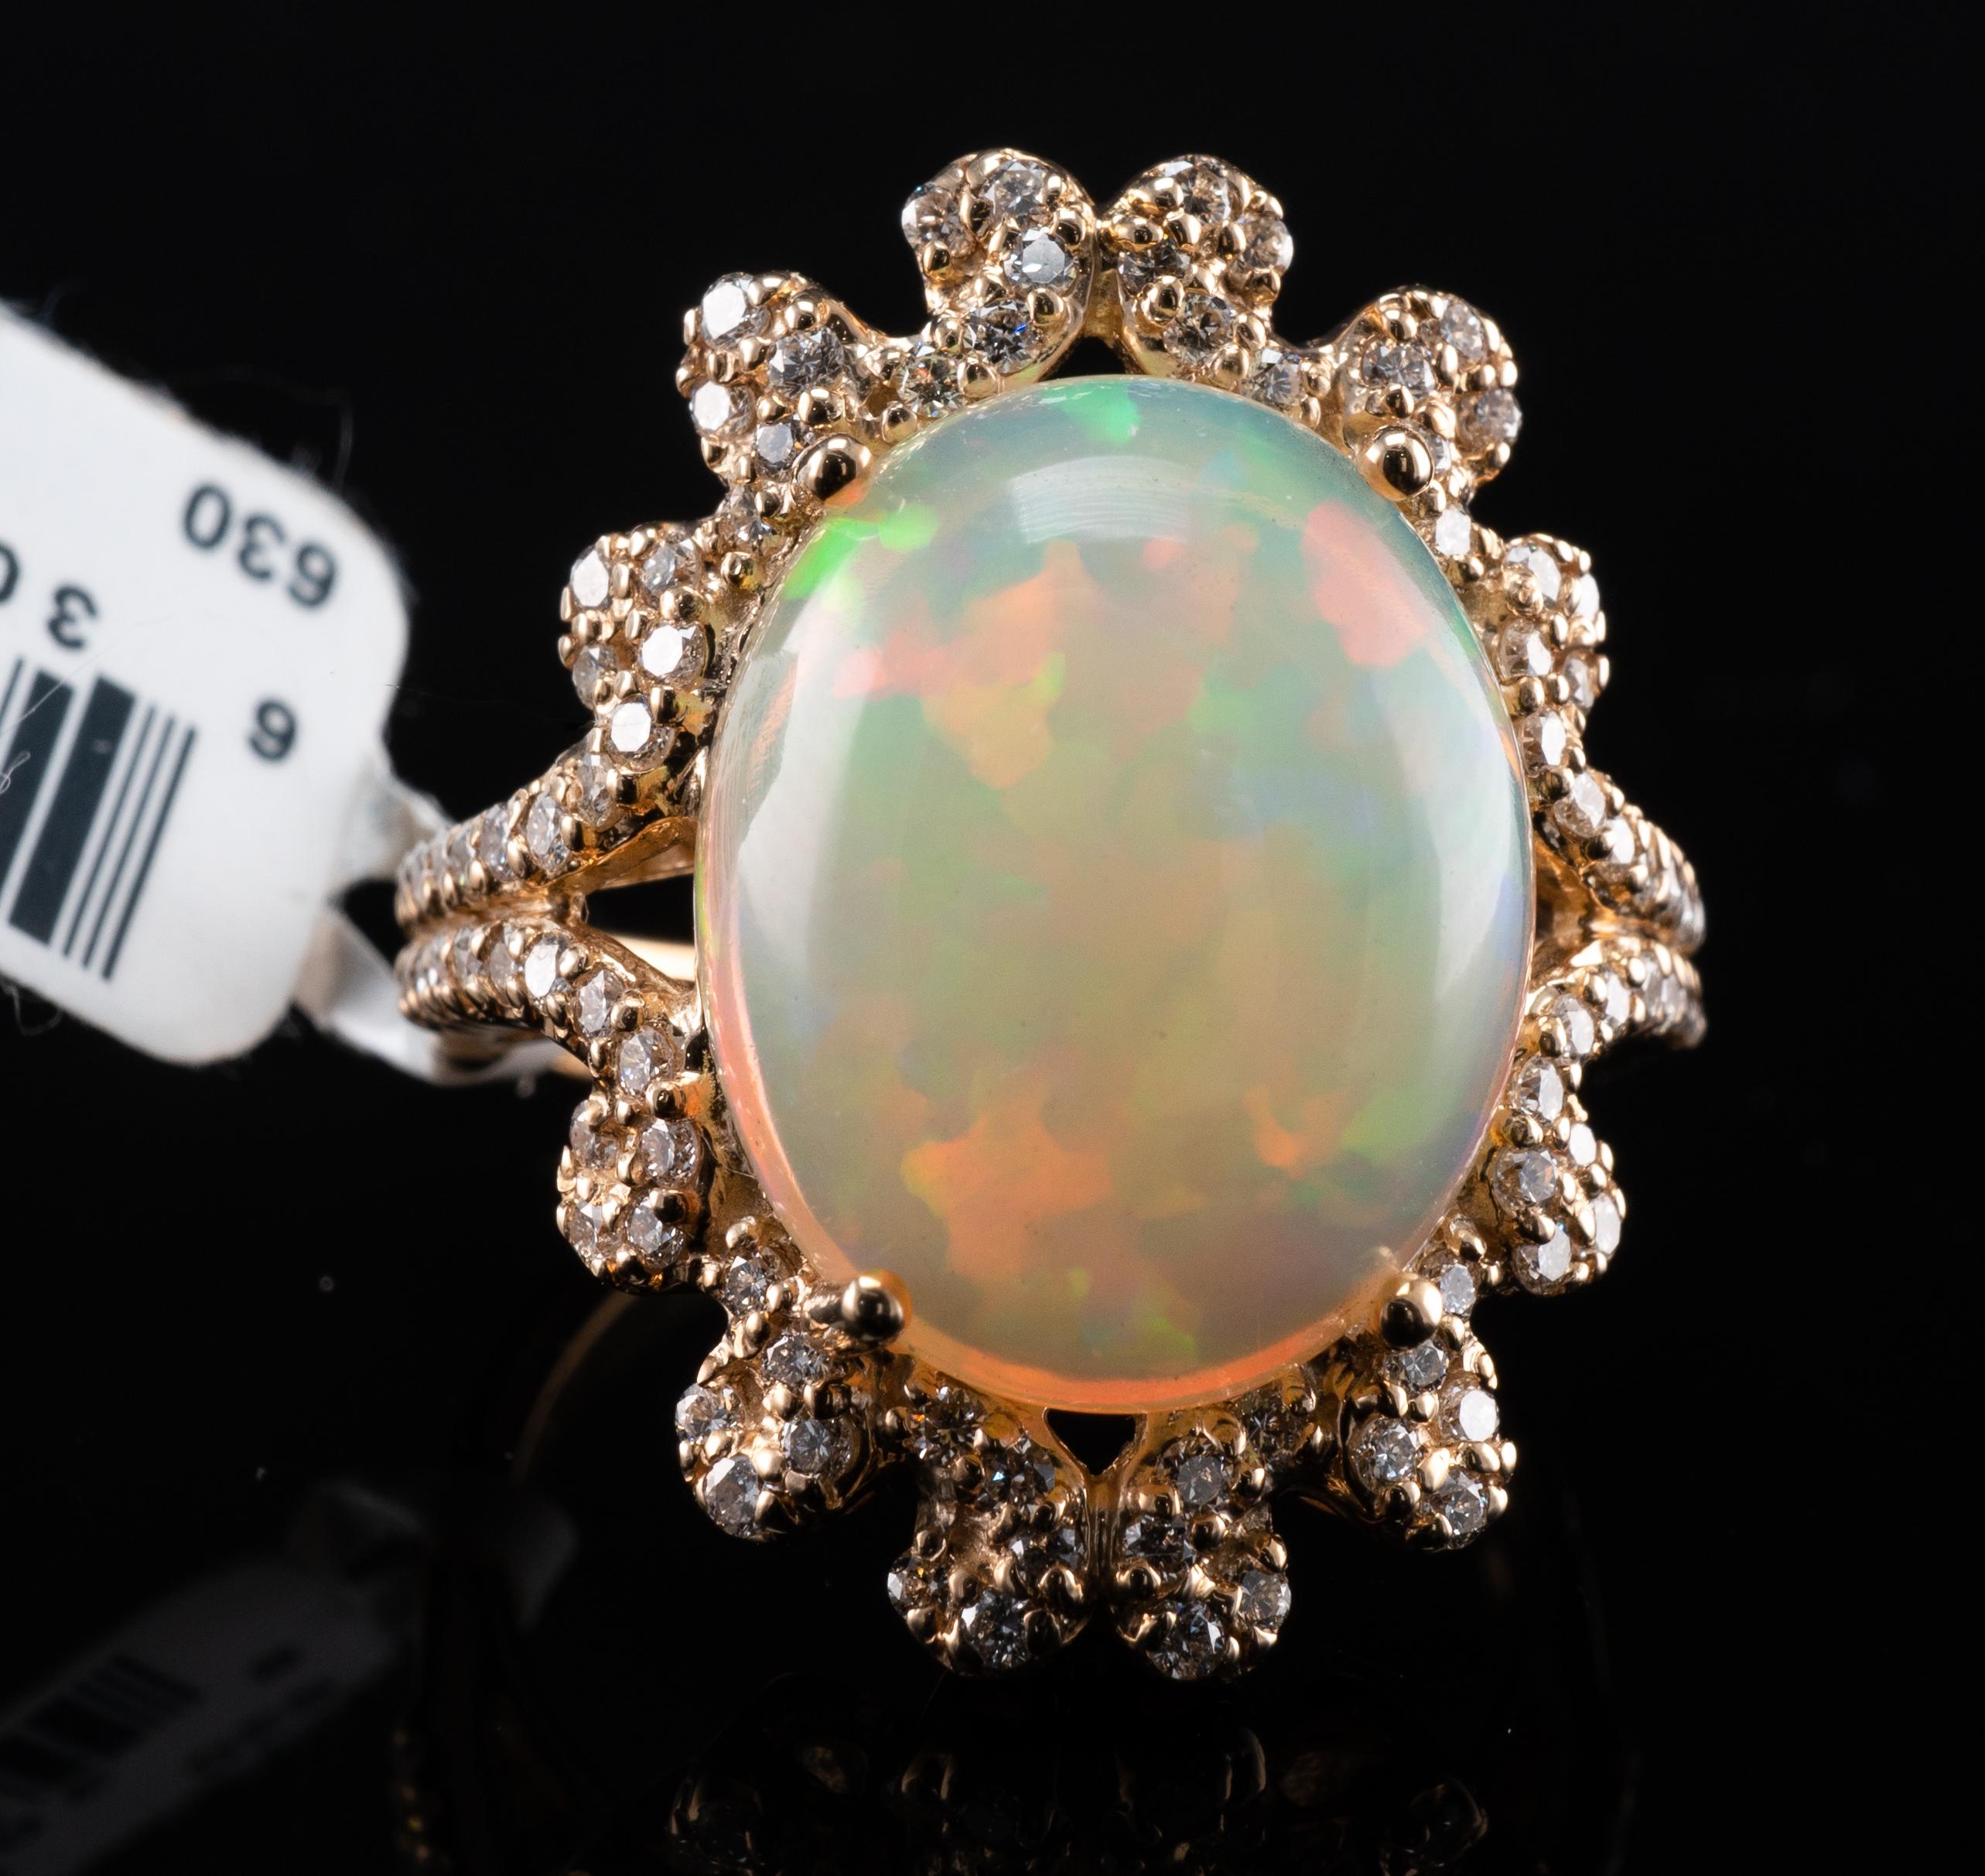 Cabochon Natural Opal Diamond Ring 14K Gold Estate Retail Tag $8400 For Sale